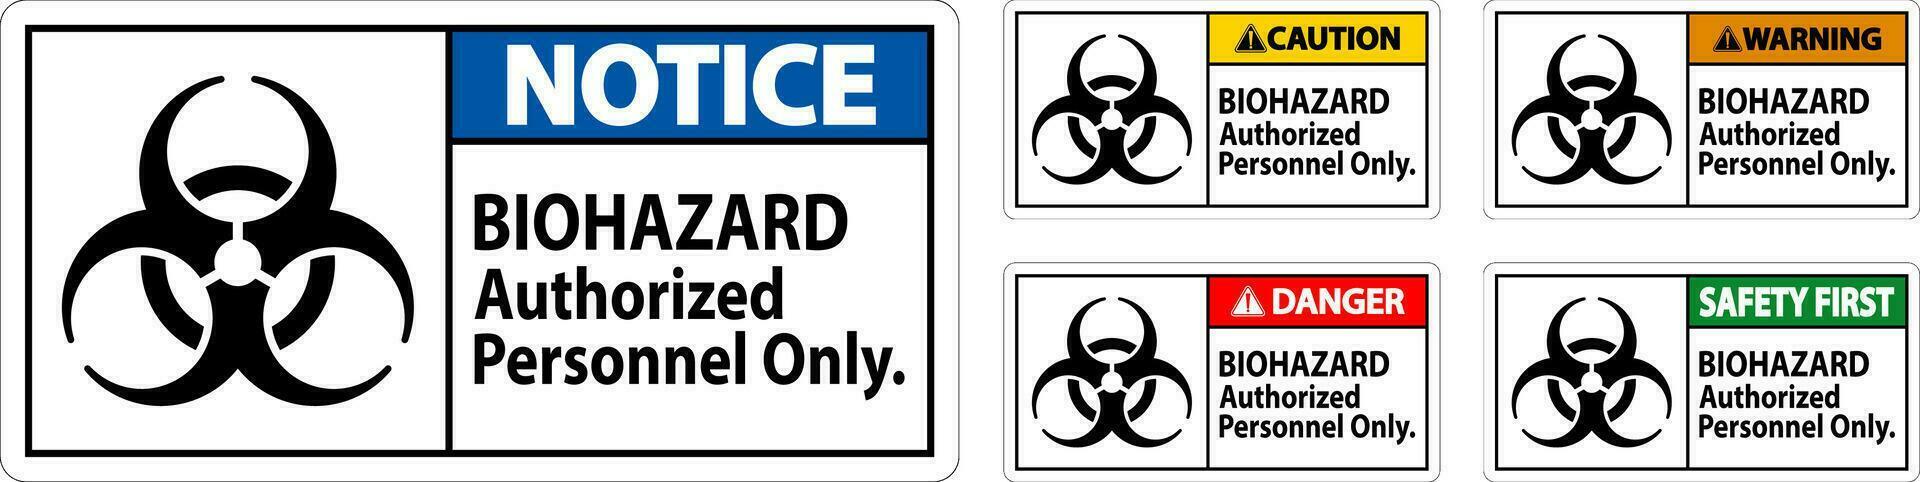 Warning Label Biohazard Authorized Personnel Only vector